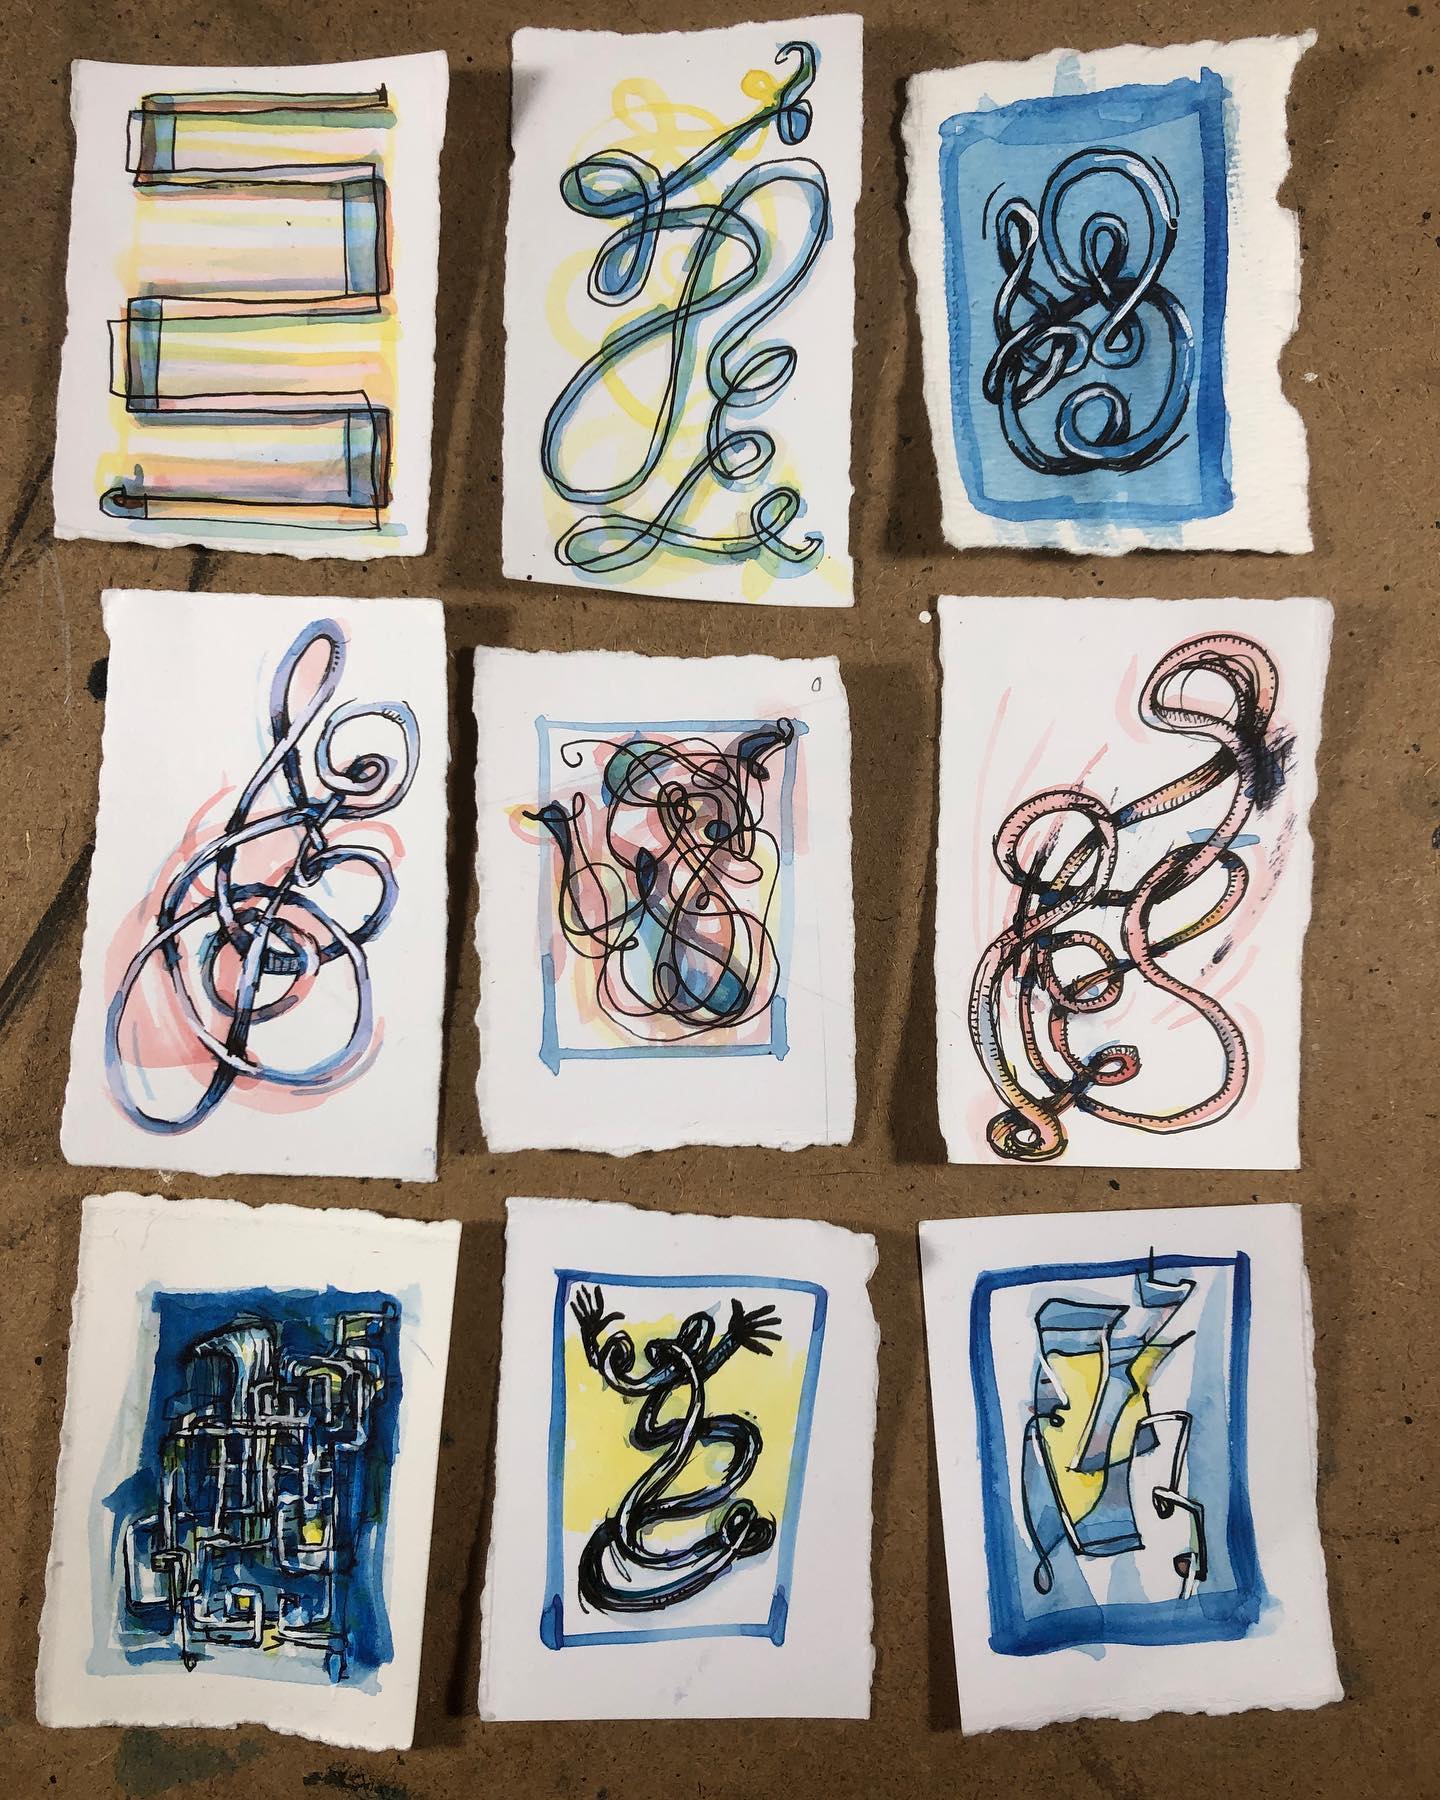 Nine watercolor/ink drawings of squiggley noodle forms